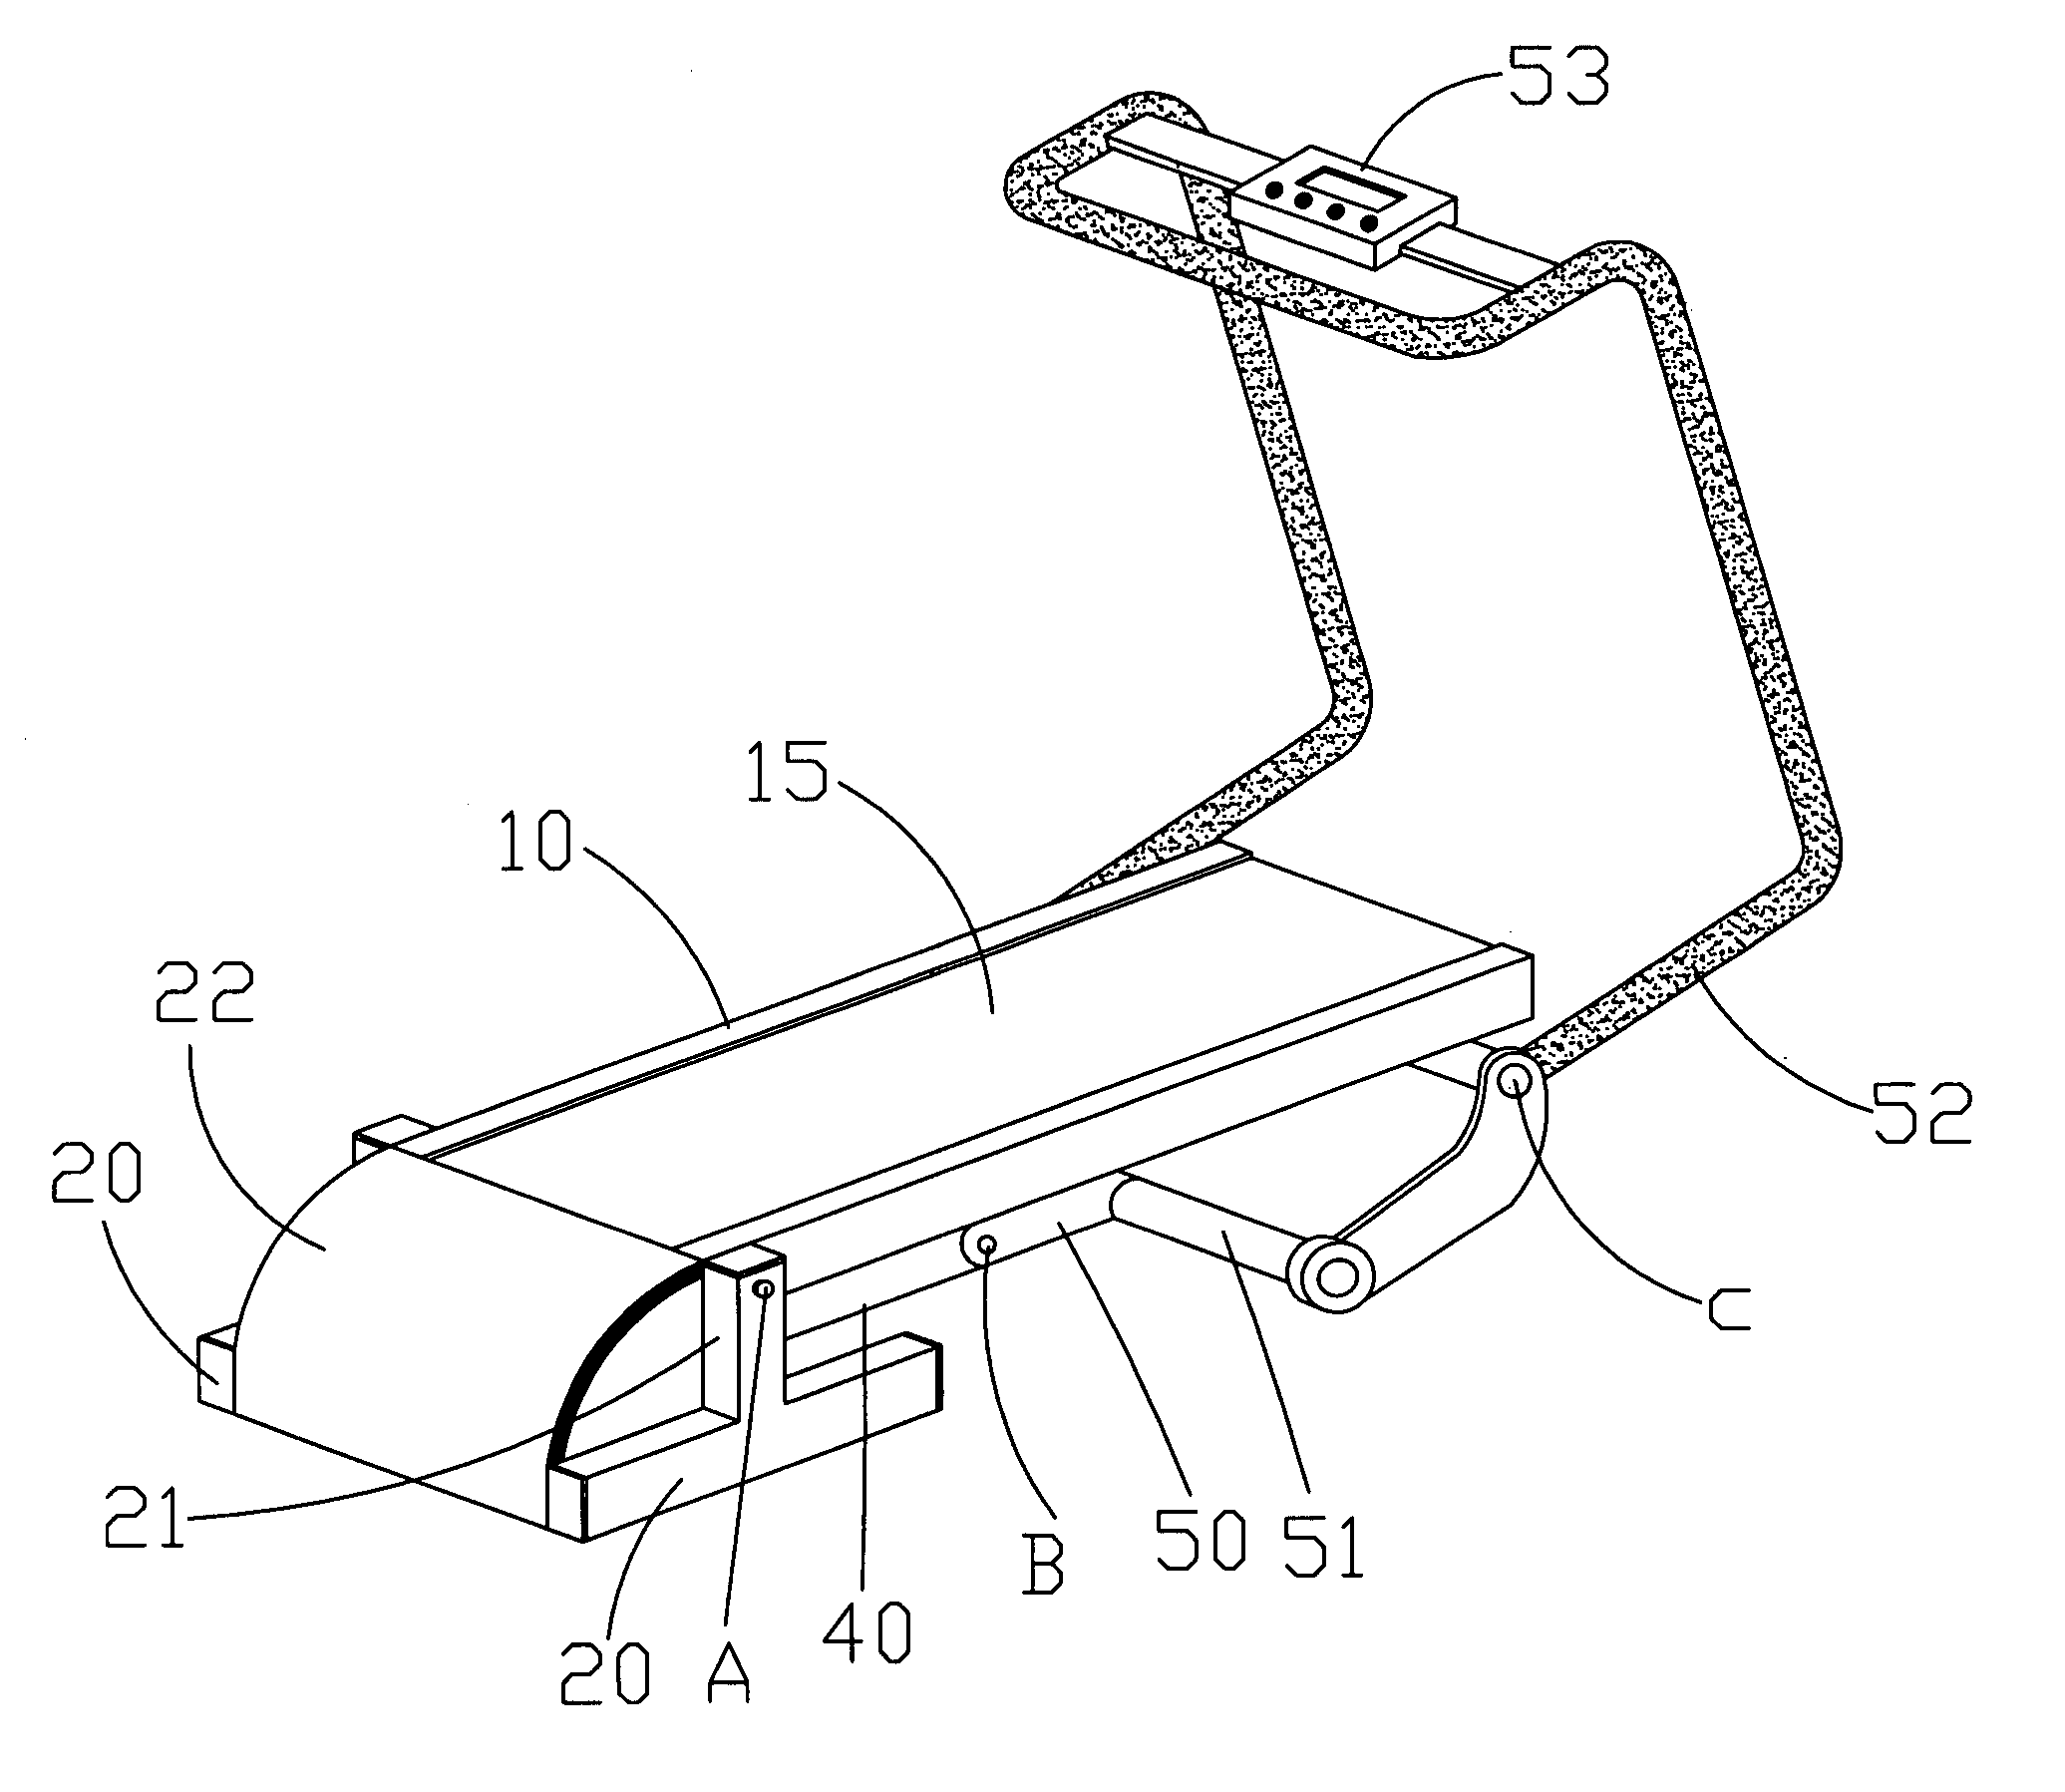 Folding-up mechanism for an electric treadmill